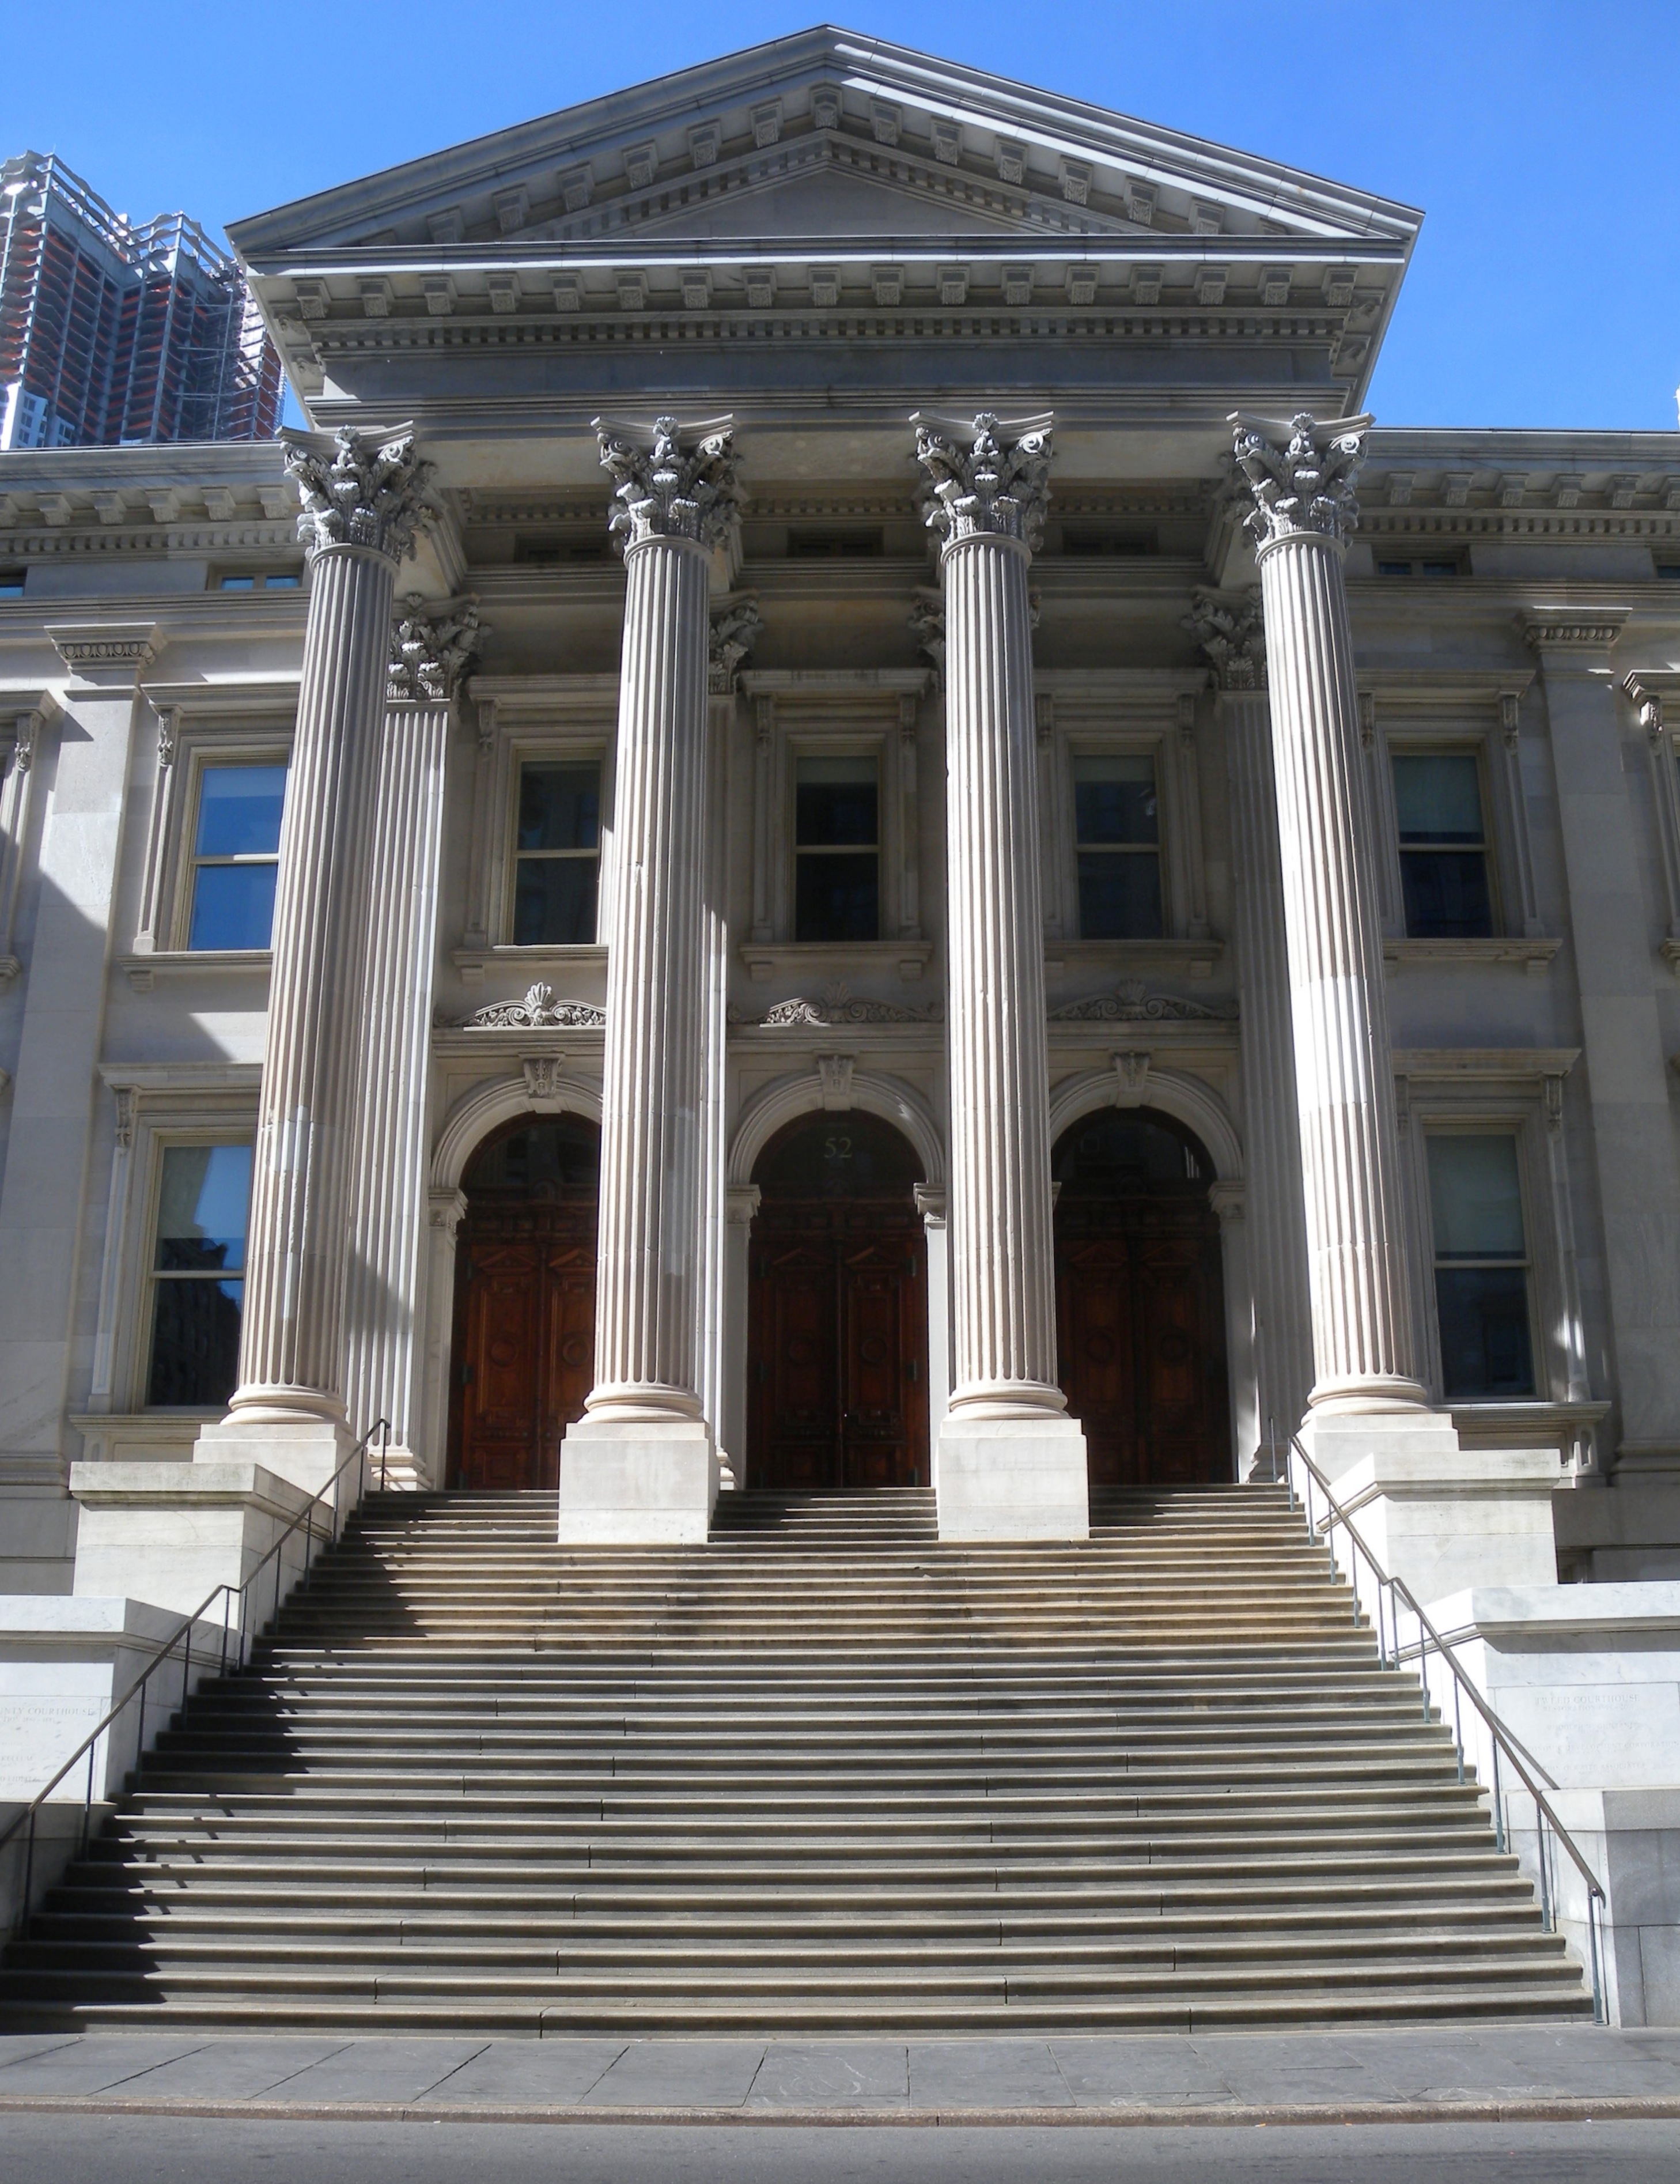 As of 2023, the former [[Tweed Courthouse